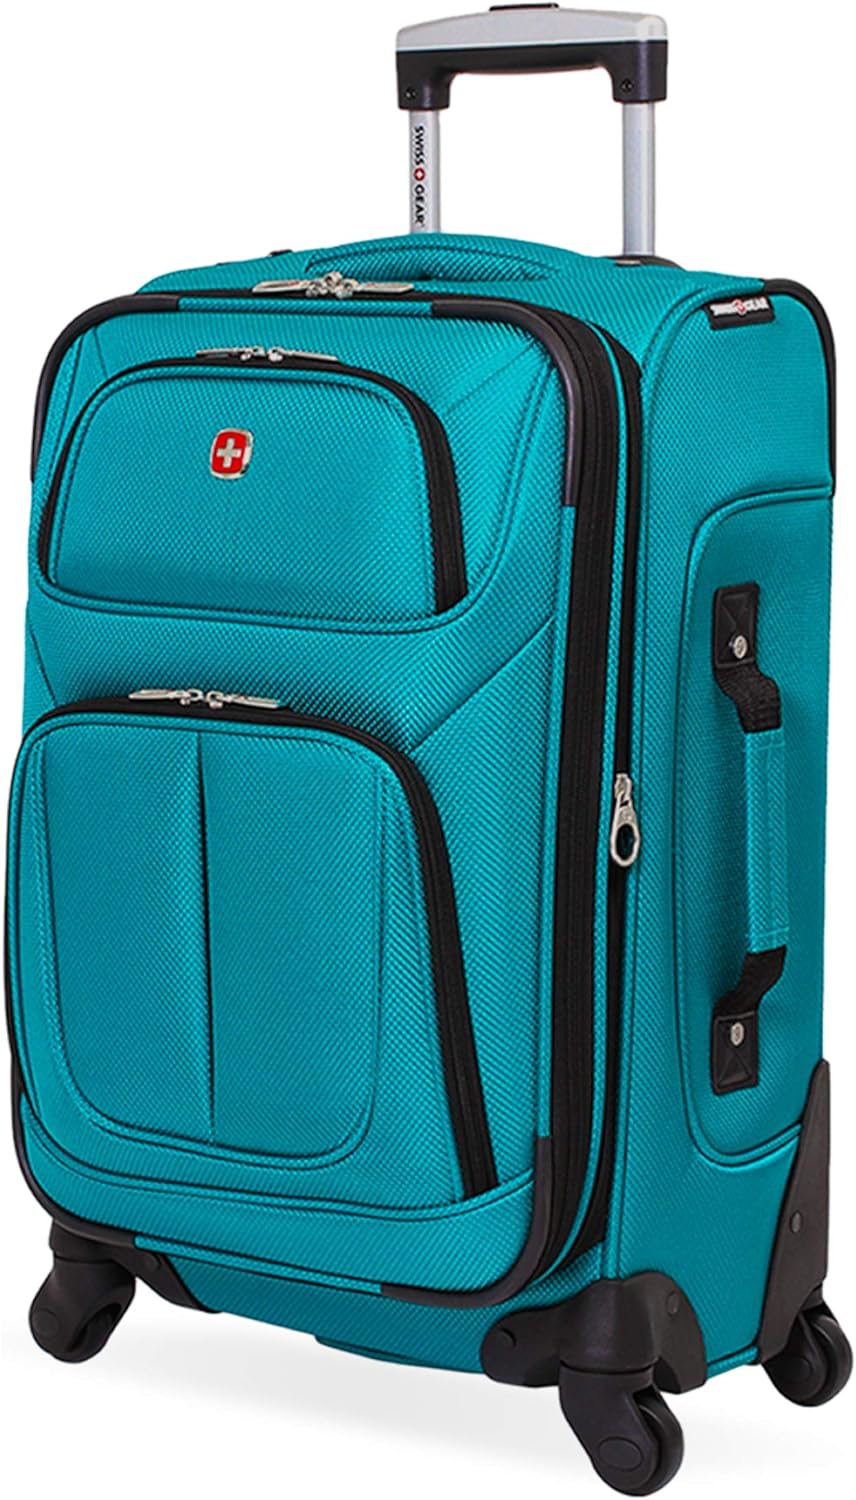 SwissGear Sion Softside Expandable Roller Luggage, Teal, Carry-On 21-Inch 